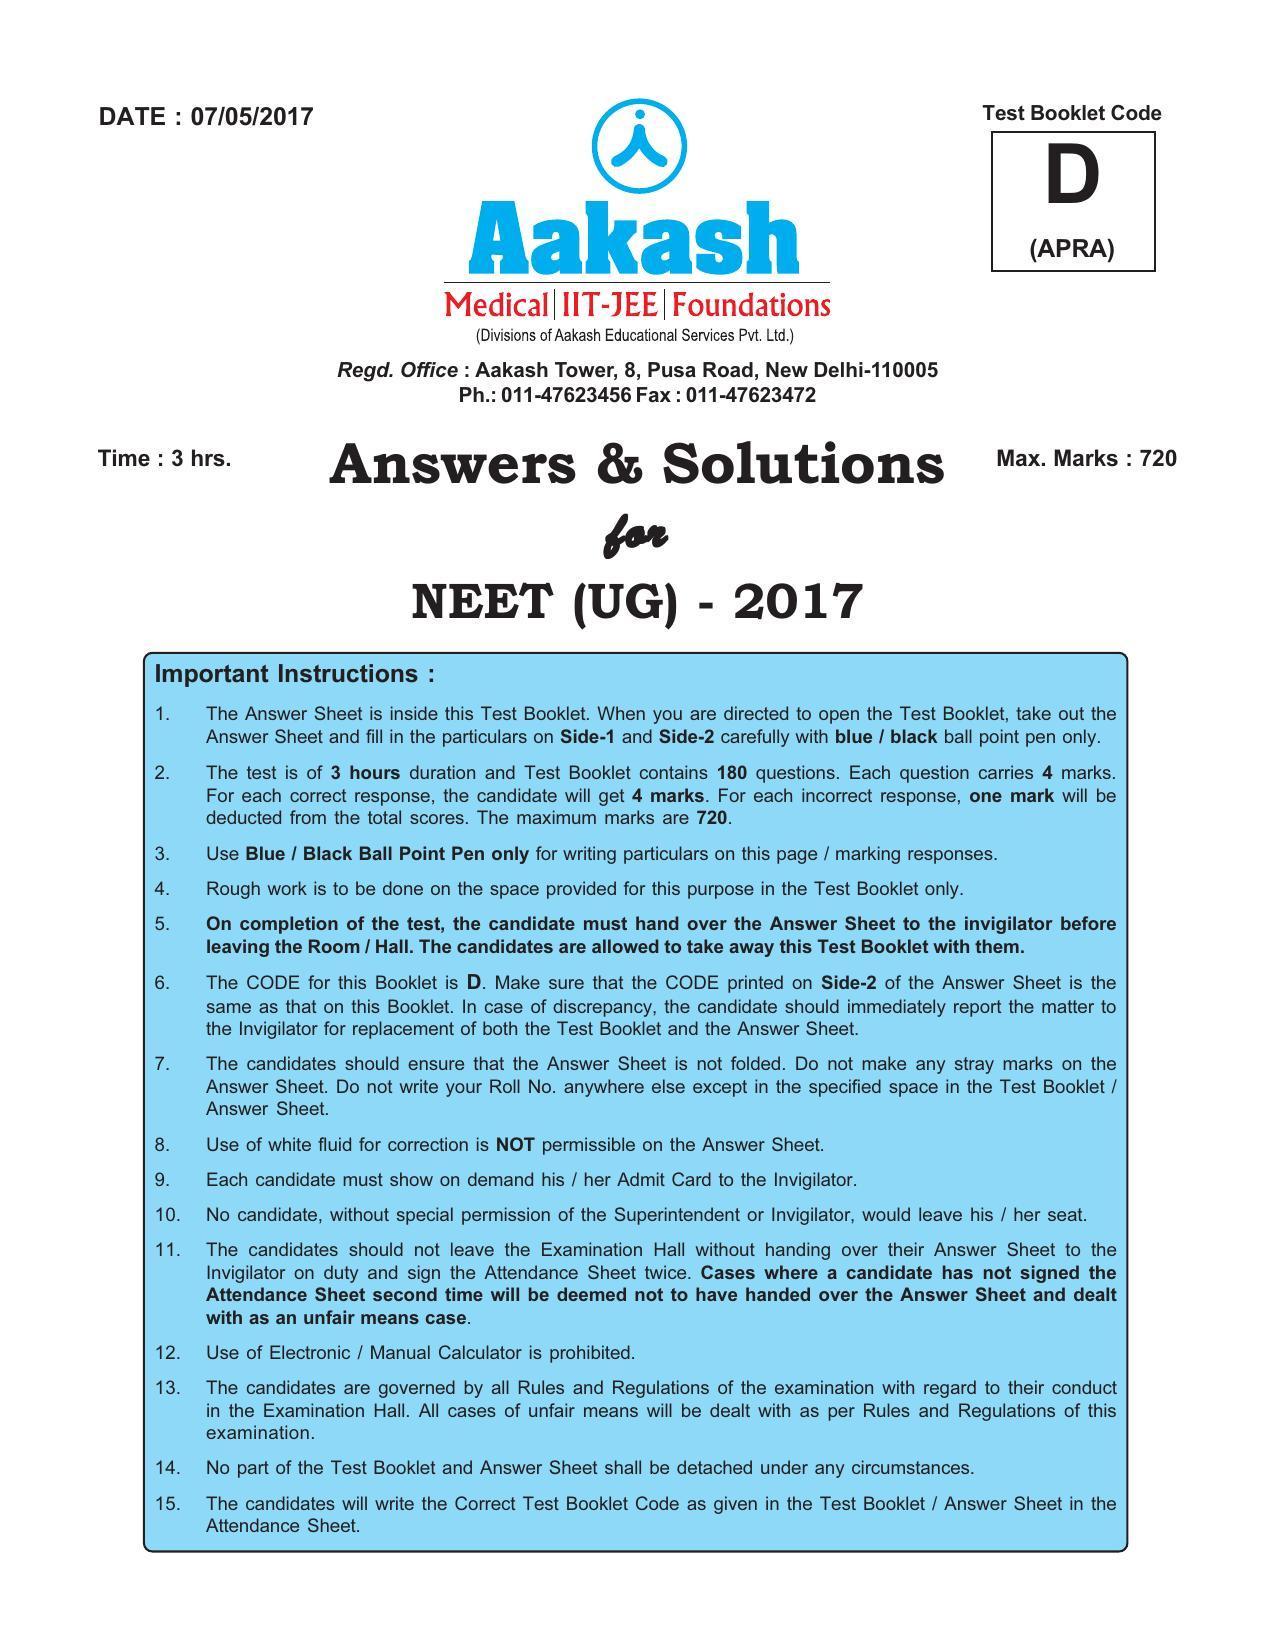  NEET Code D 2017 Answer & Solutions - Page 1